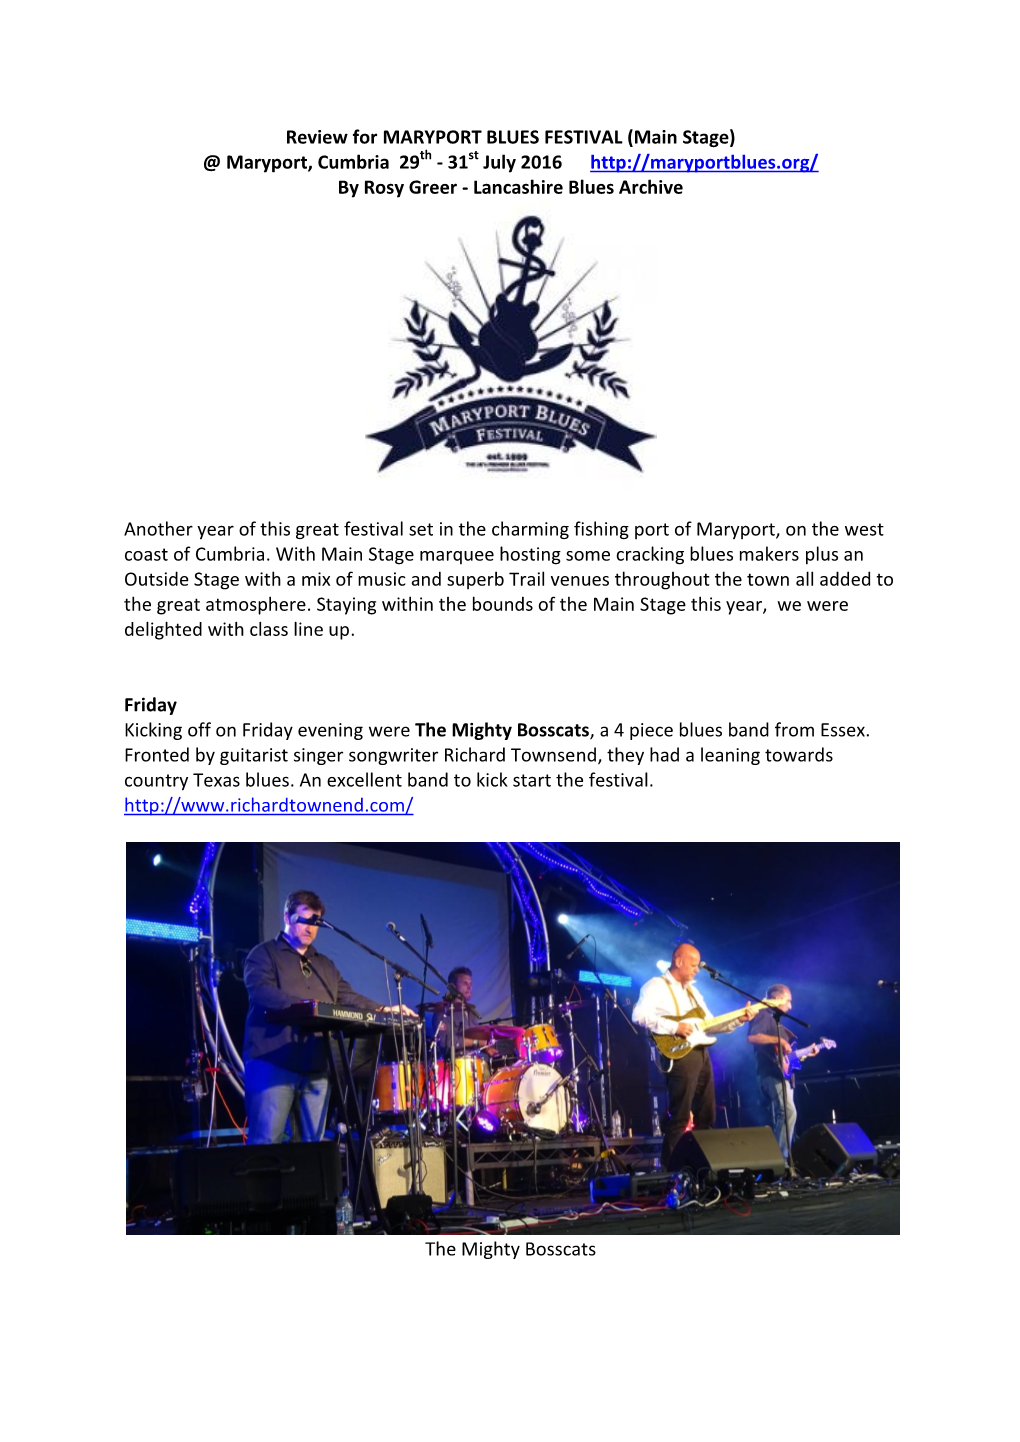 Review for MARYPORT BLUES FESTIVAL (Main Stage) @ Maryport, Cumbria 29Th - 31St July 2016 by Rosy Greer - Lancashire Blues Archive